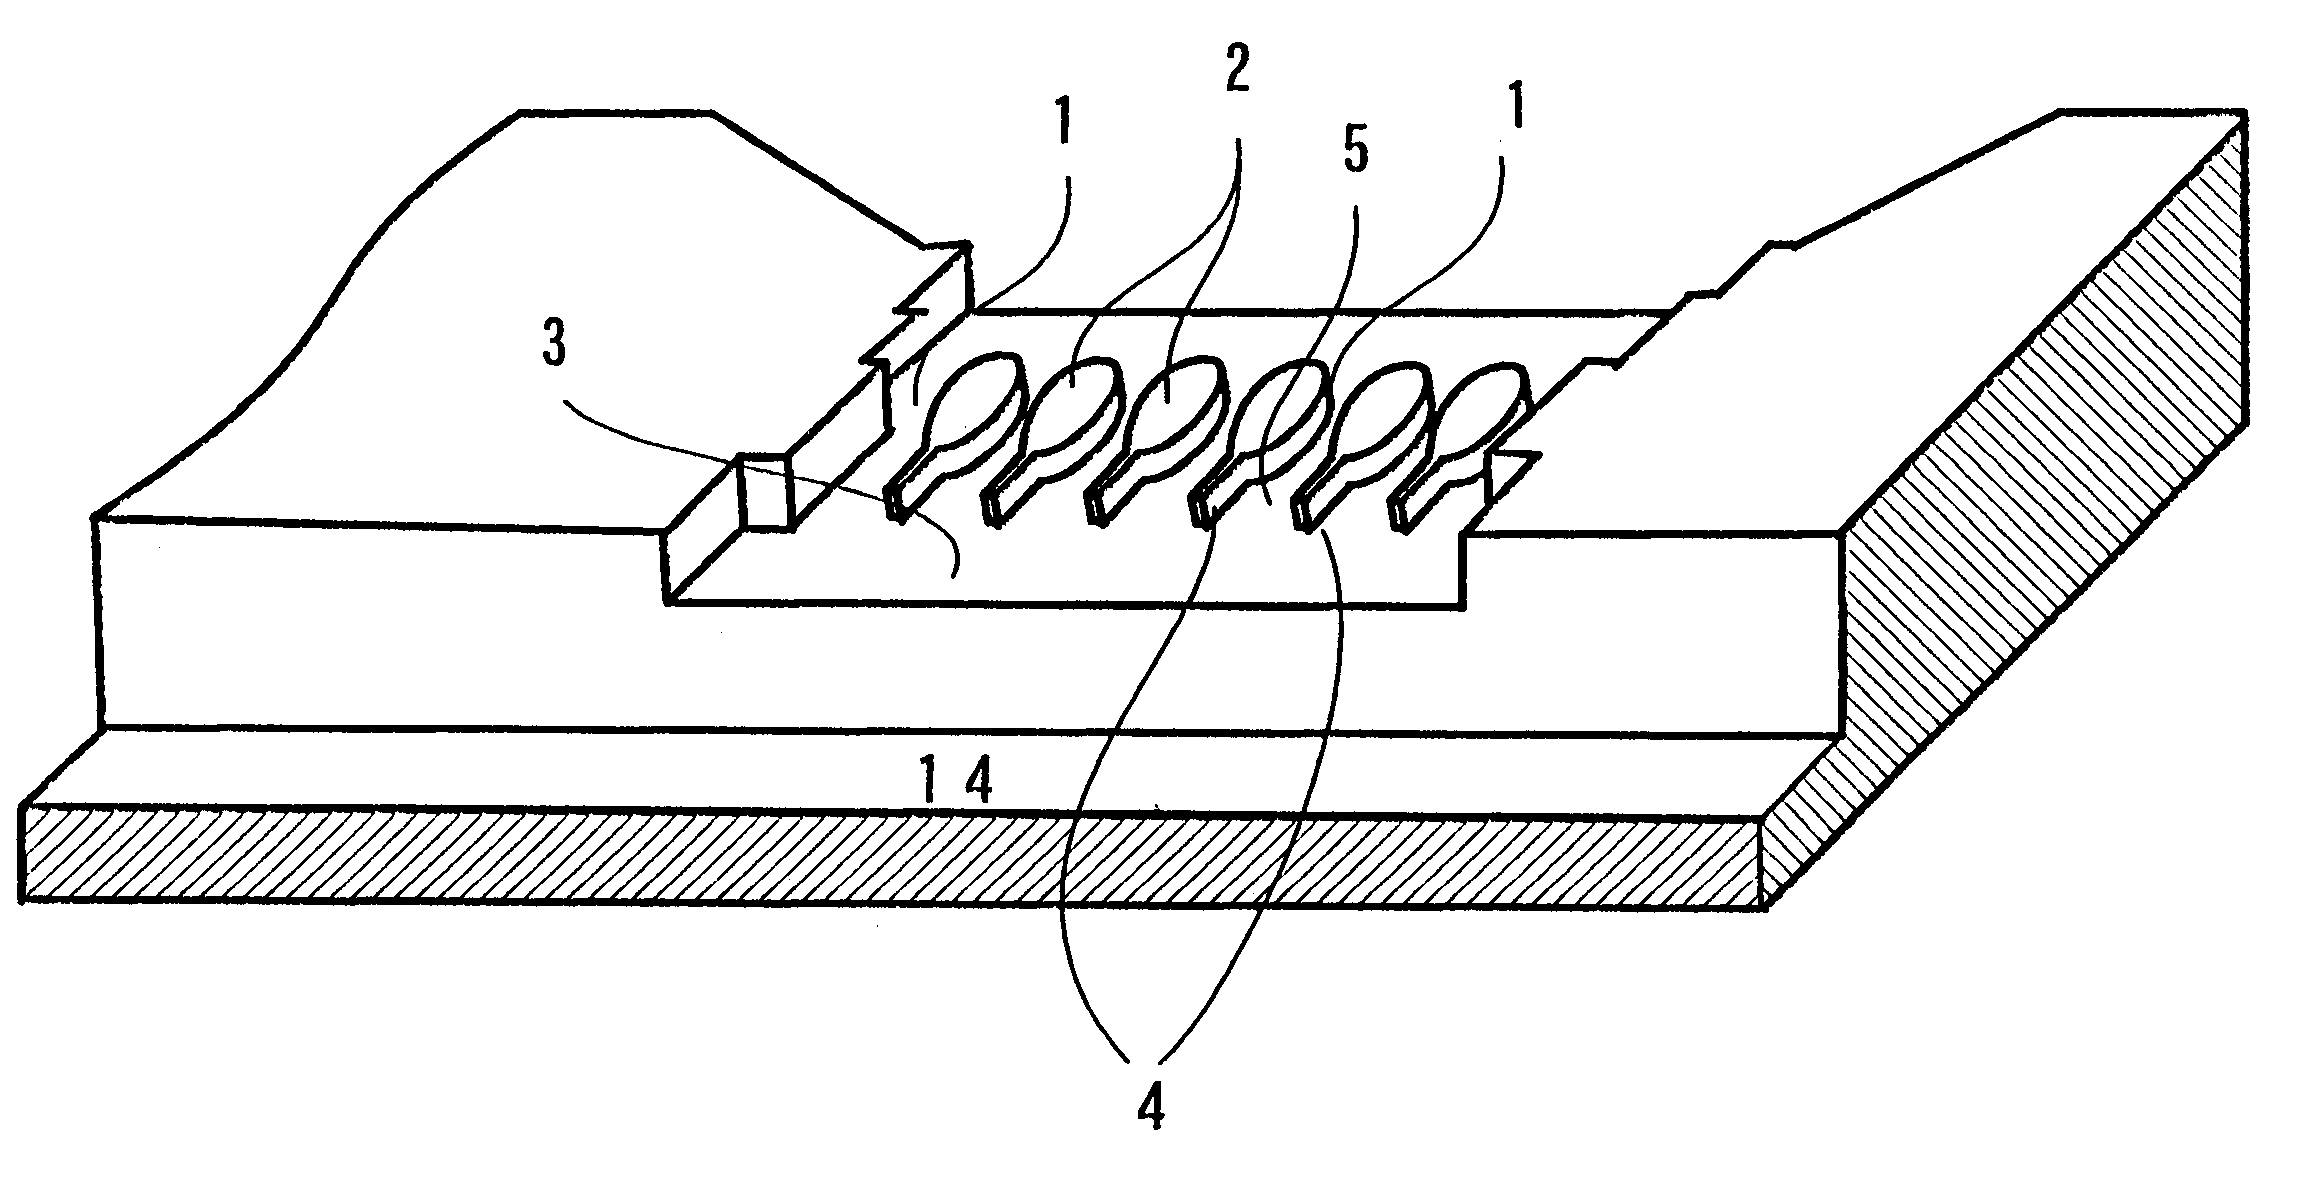 Microchannel apparatus and method of producing emulsions making use thereof